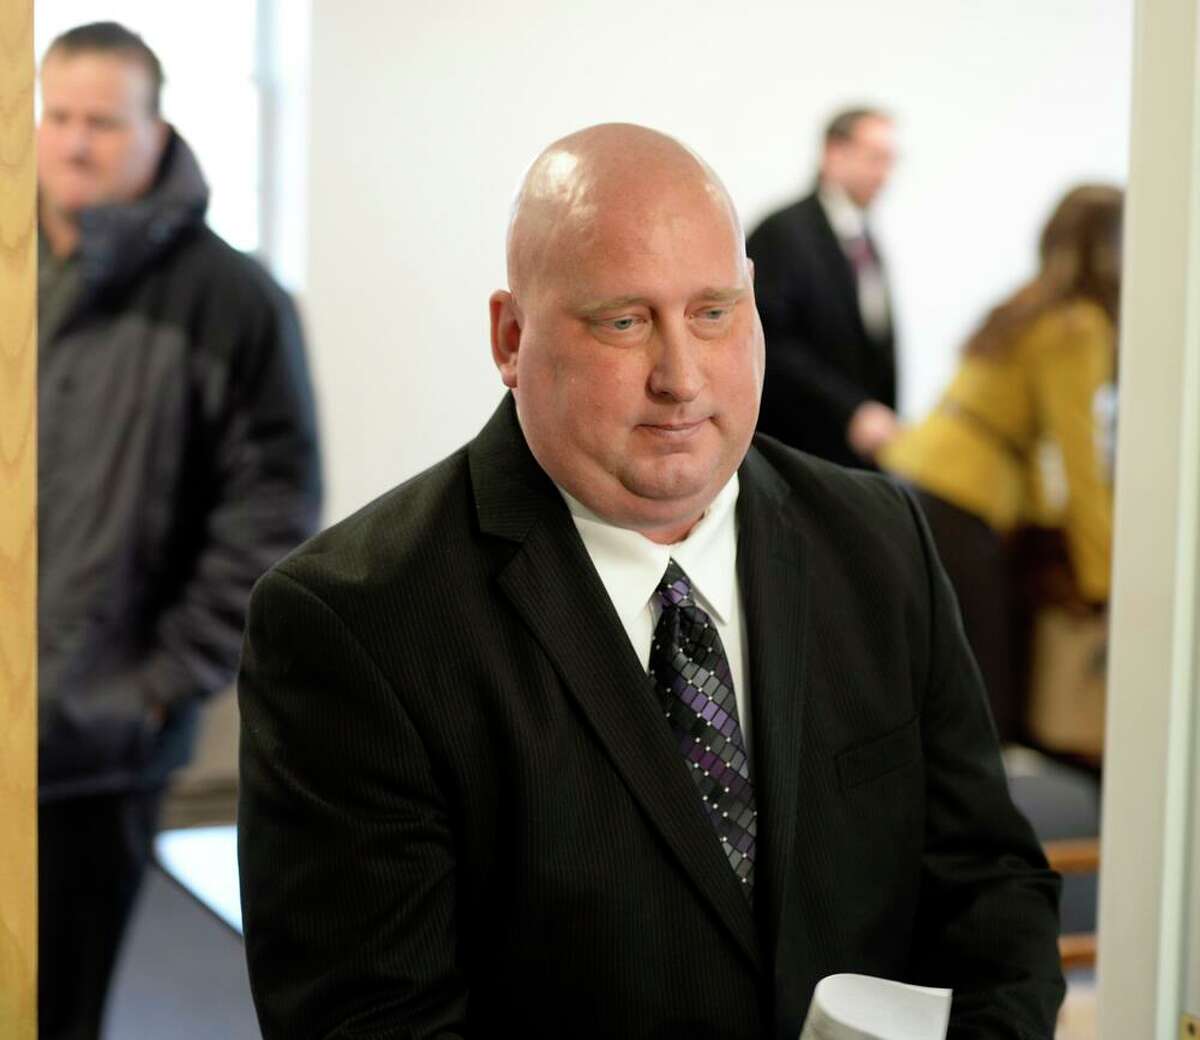 Albany Police Officer Brian Lutz leaves Menands Town Court after his sentencing on a DWAI charge on Thursday, Nov. 21, 2013. (Skip Dickstein/Times Union)